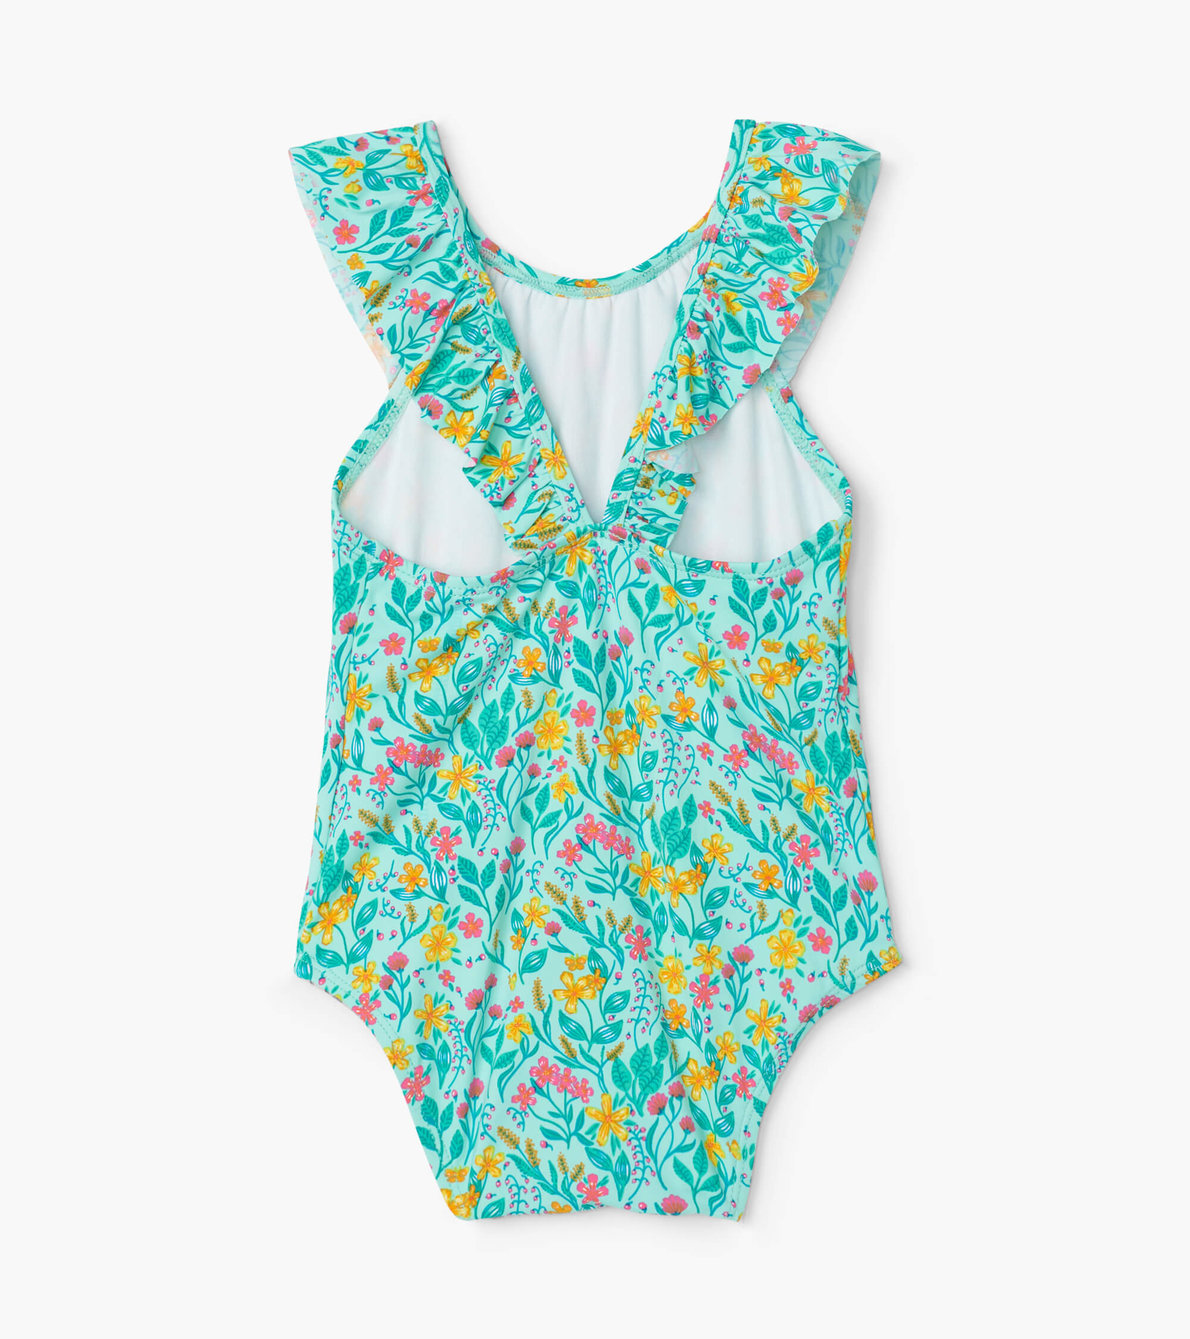 View larger image of Summer Garden Baby Ruffle Swimsuit